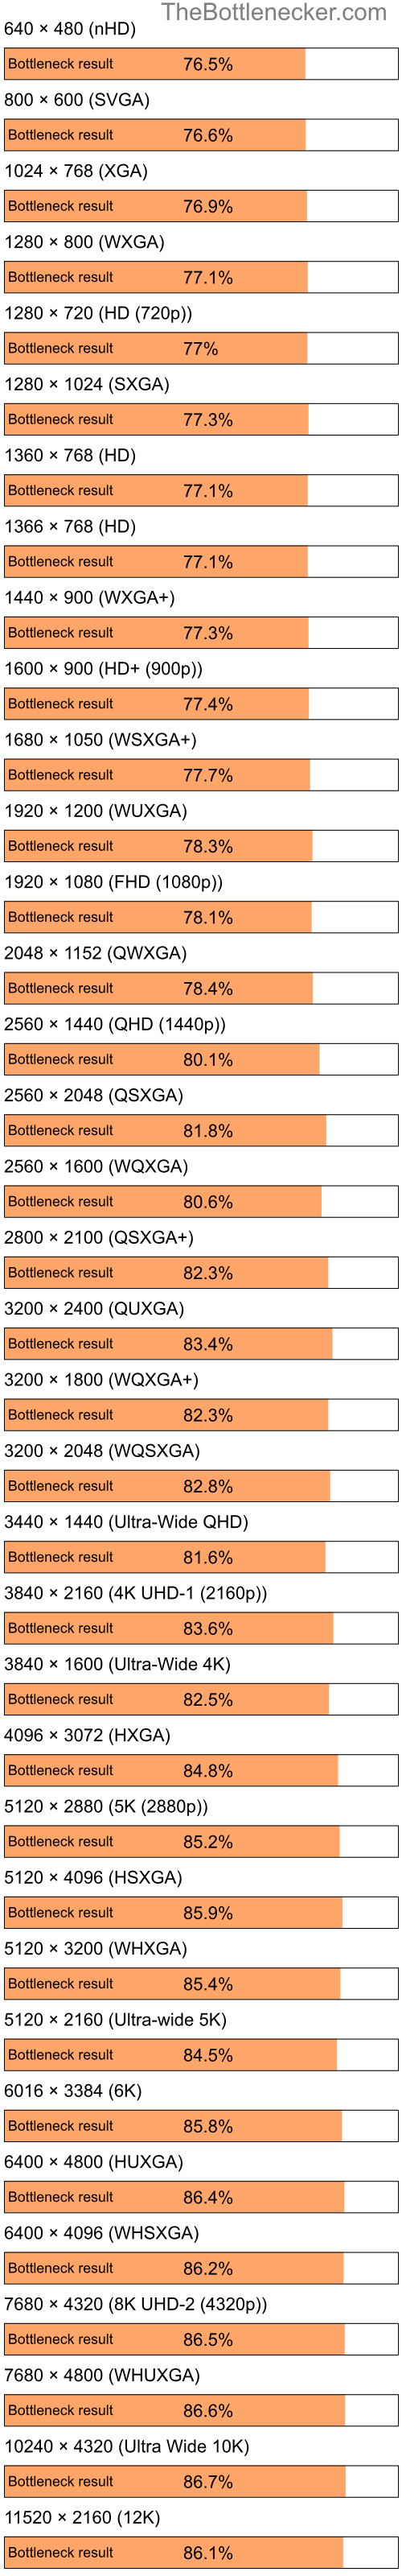 Bottleneck results by resolution for Intel Atom N280 and AMD Radeon 9500 9700 in7 Days to Die